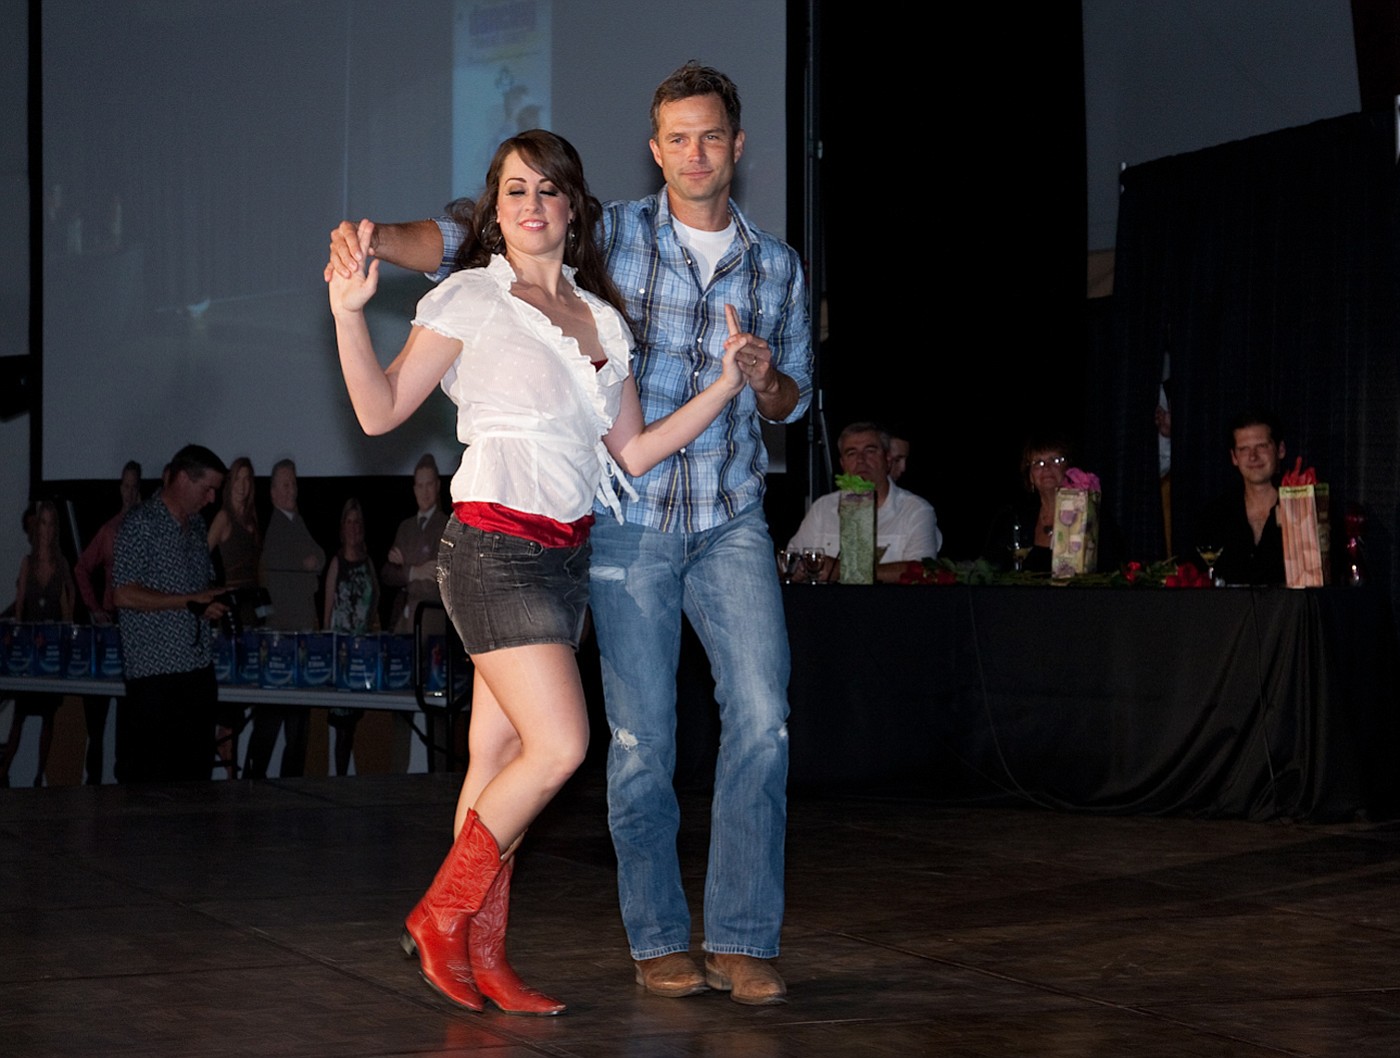 Learn to country dance at the Silver Star Saloon in Vancouver.